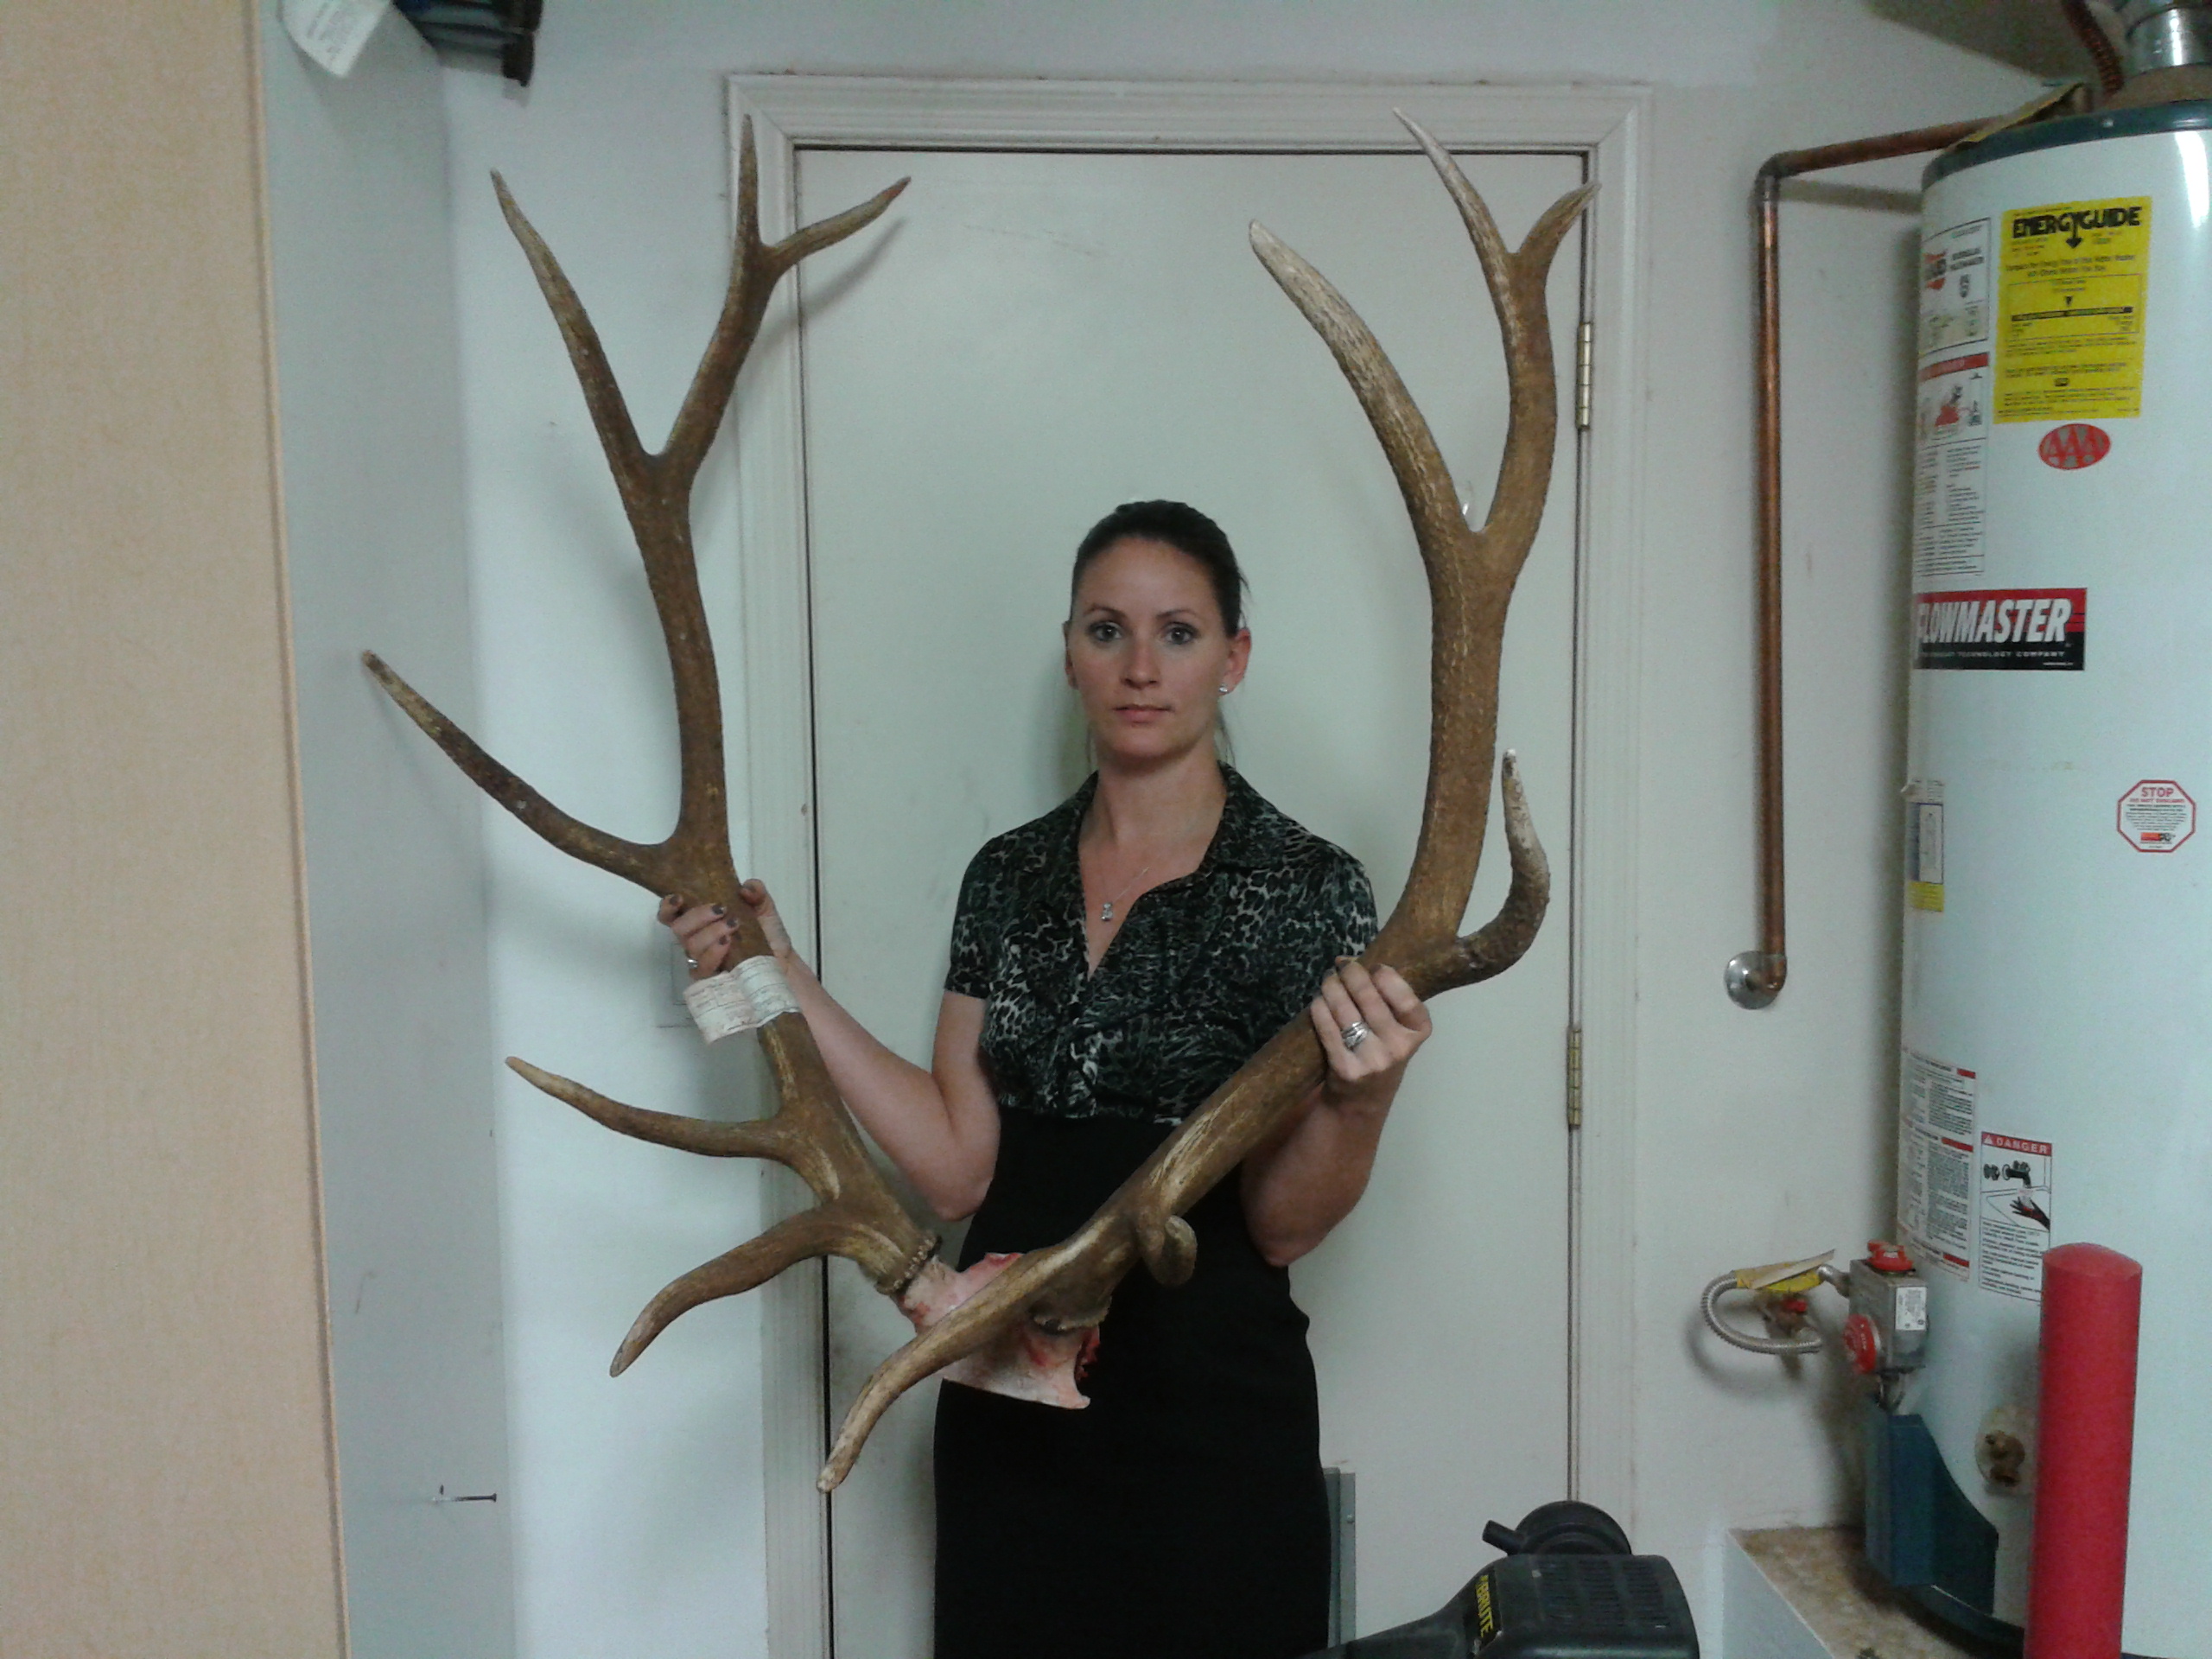 My Wifes 6A Bull Elk - Elk Hunting - CouesWhitetail.com Discussion forum